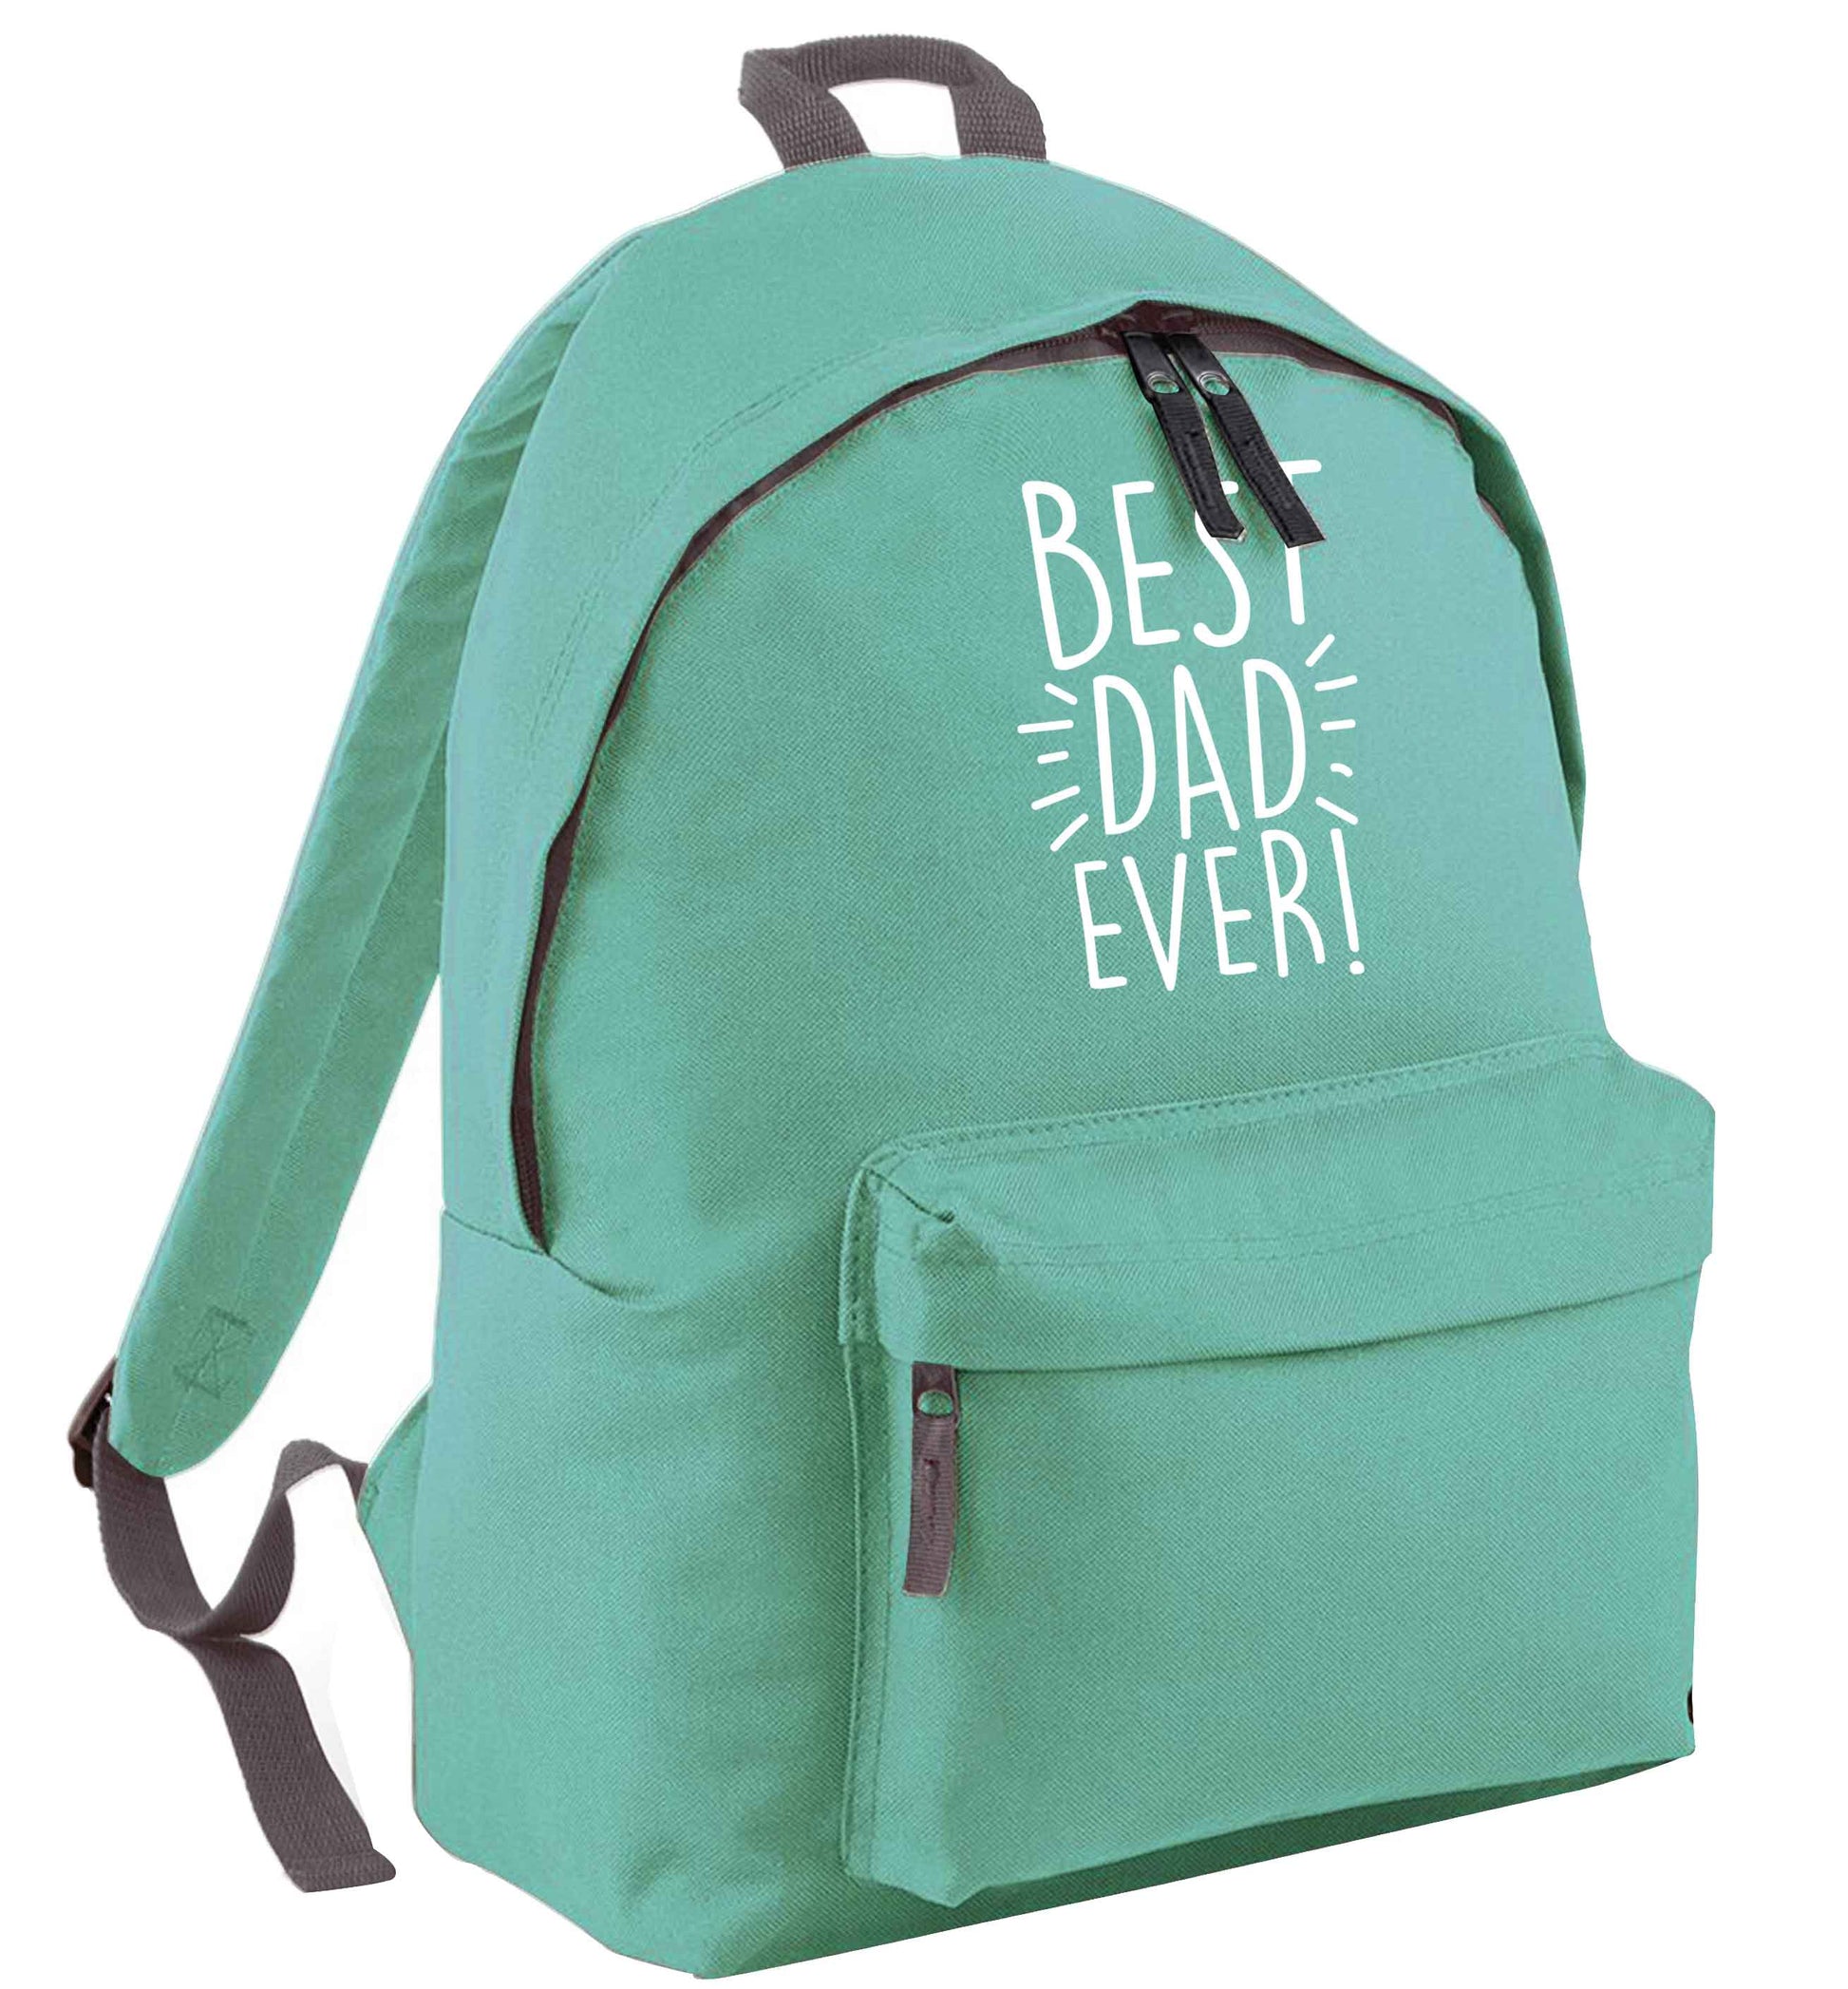 Best dad ever! mint adults backpack